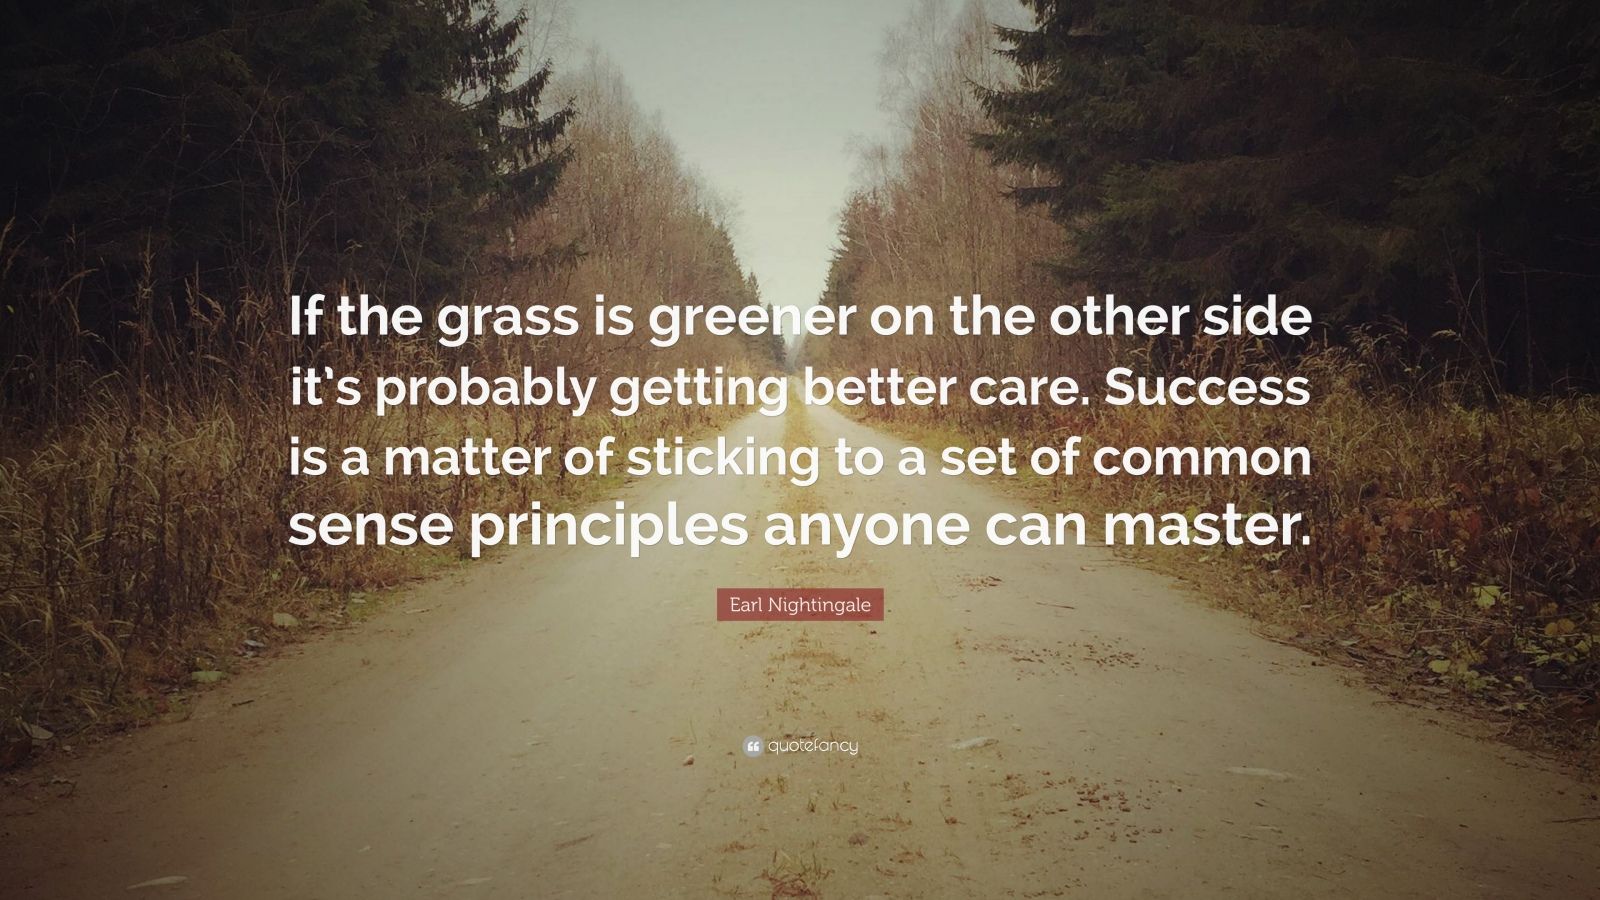 Earl Nightingale Quote: “If the grass is greener on the other side it’s